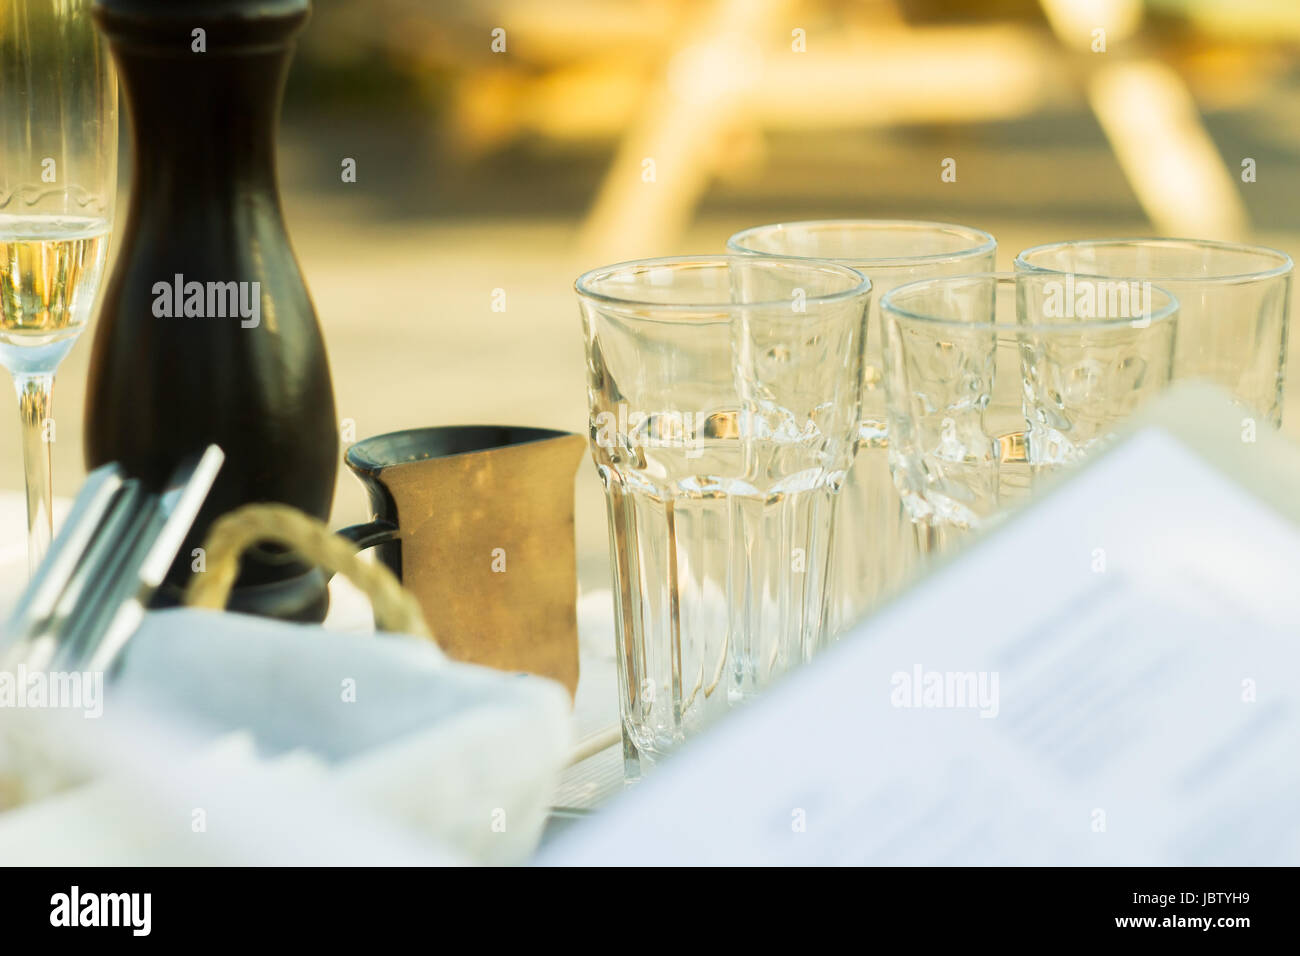 Ordering at a restaurant, glasses on the table Stock Photo